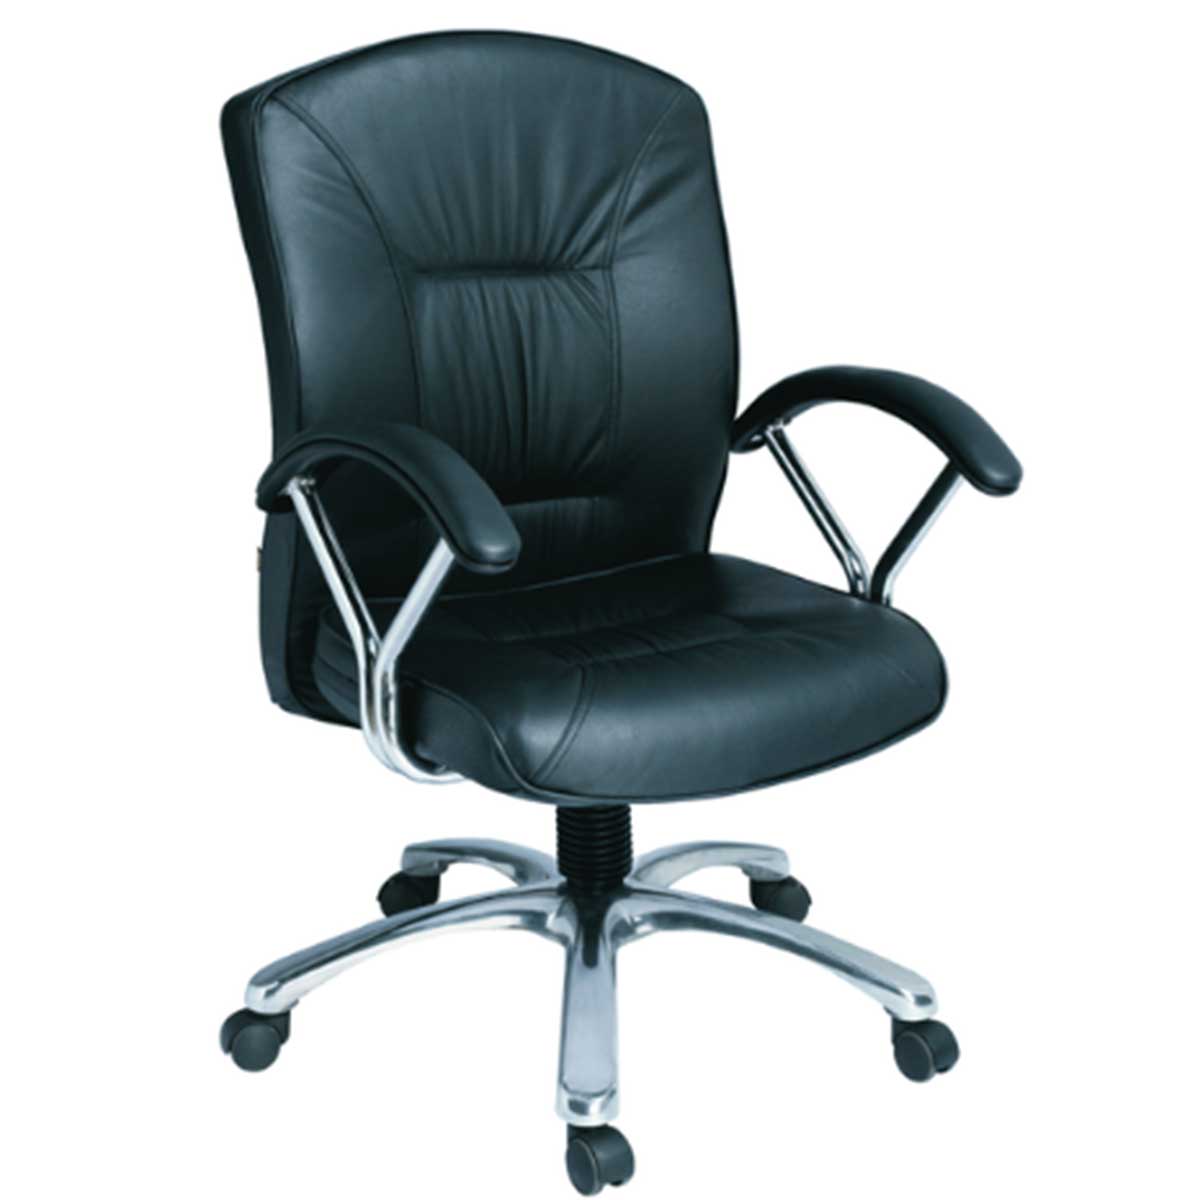 Godrej office chair Manufacturers, Suppliers in Paschim Vihar